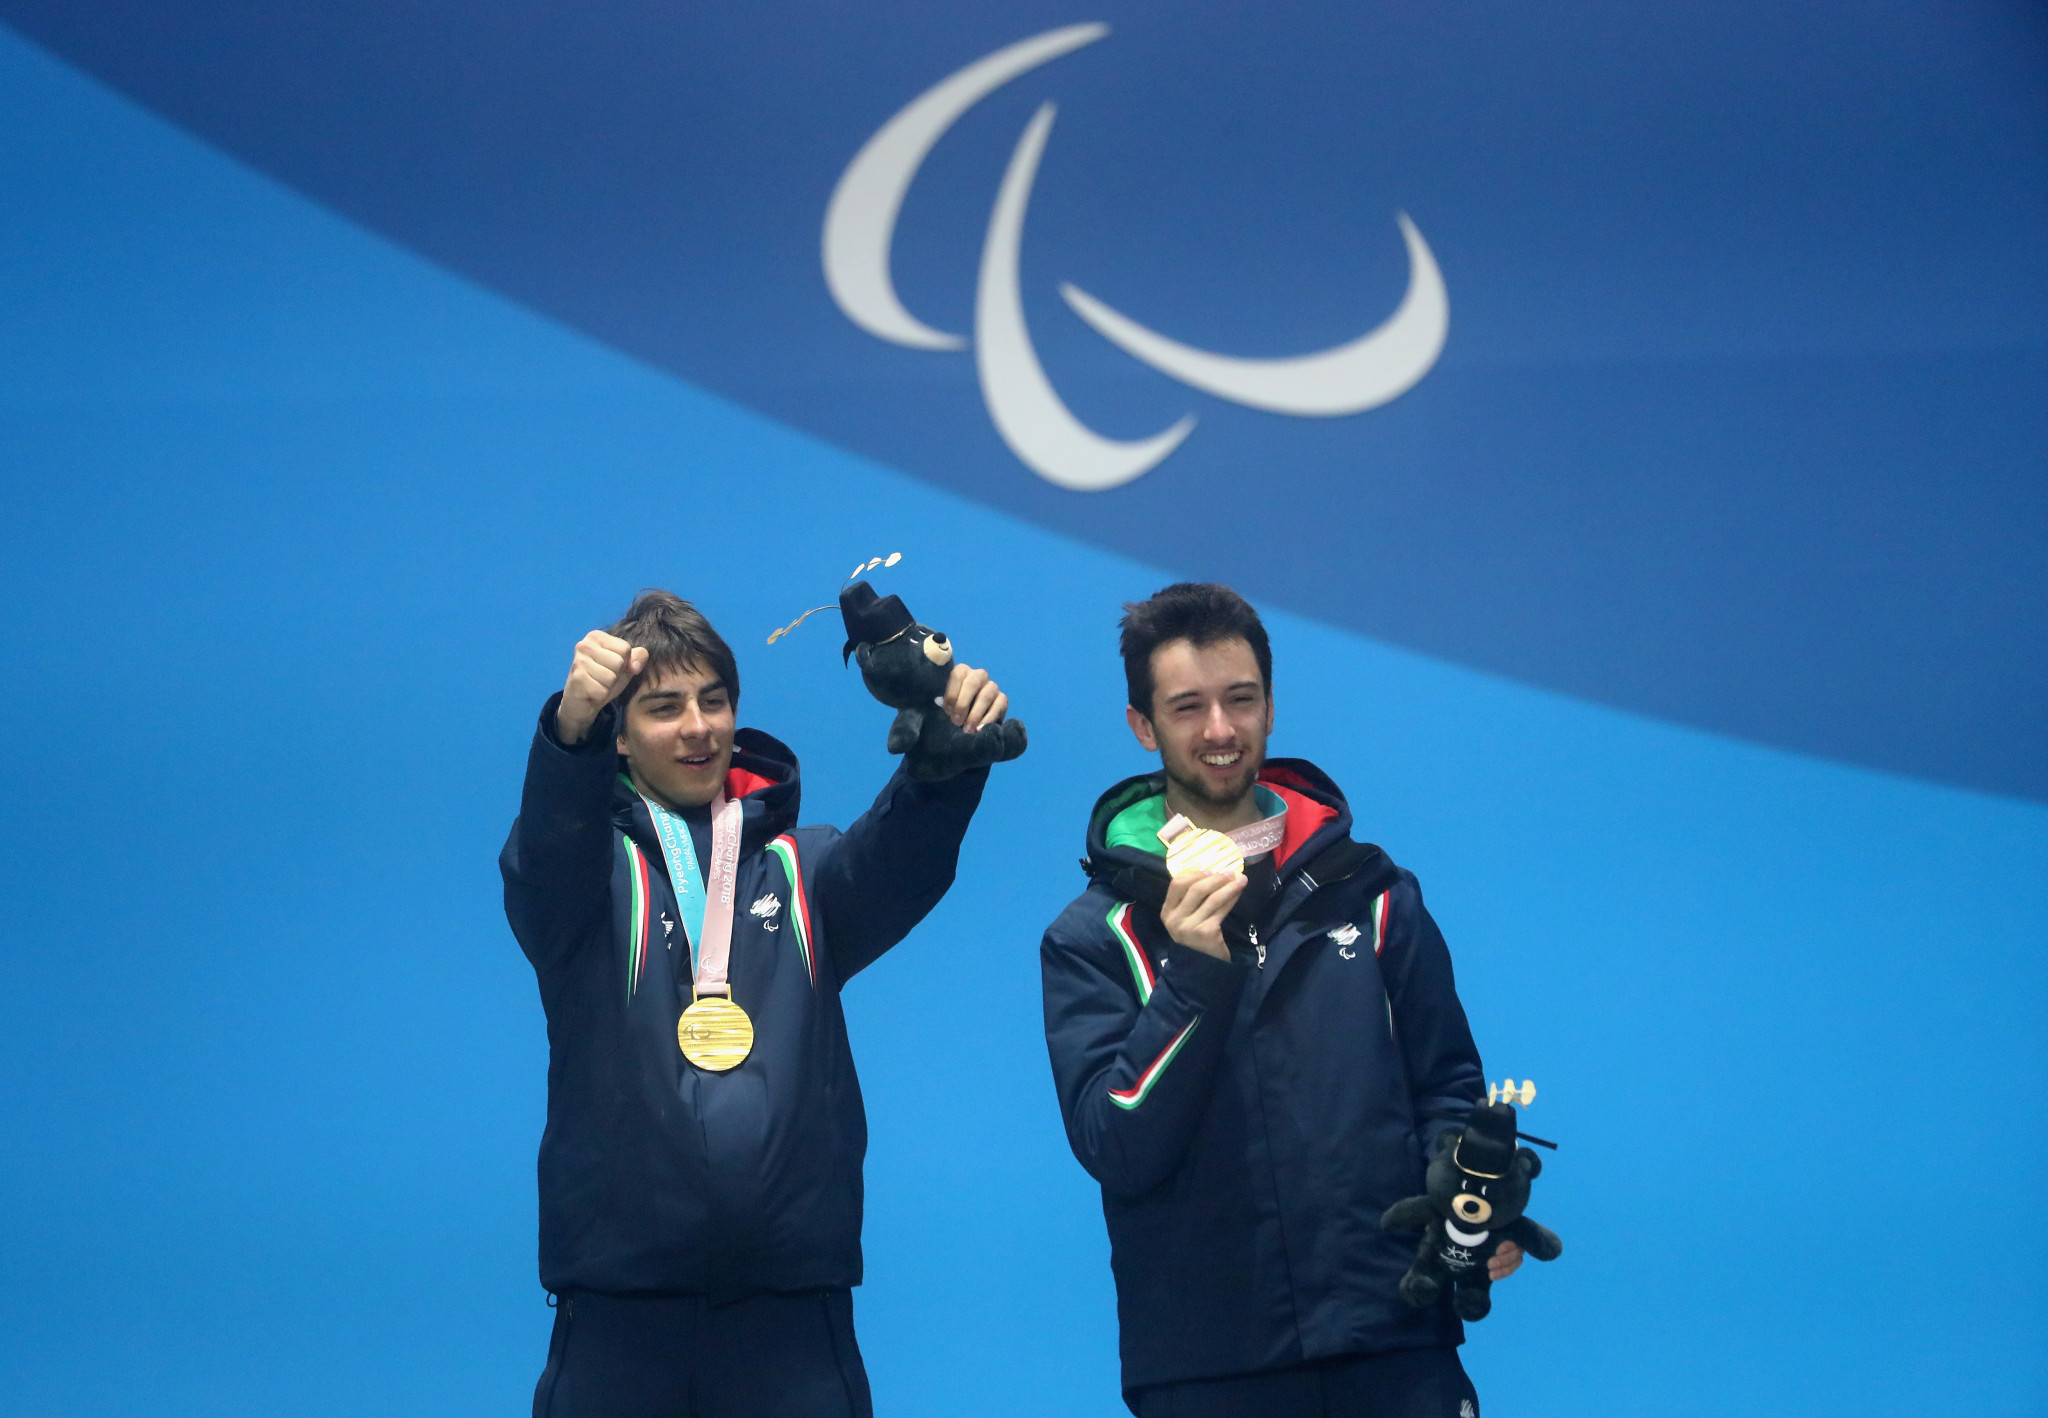 Giacomo Bertagnolli and his guide Fabrizio Casal celebrate winning gold at the Pyeongchang 2018 Winter Paralympics ©Getty Images